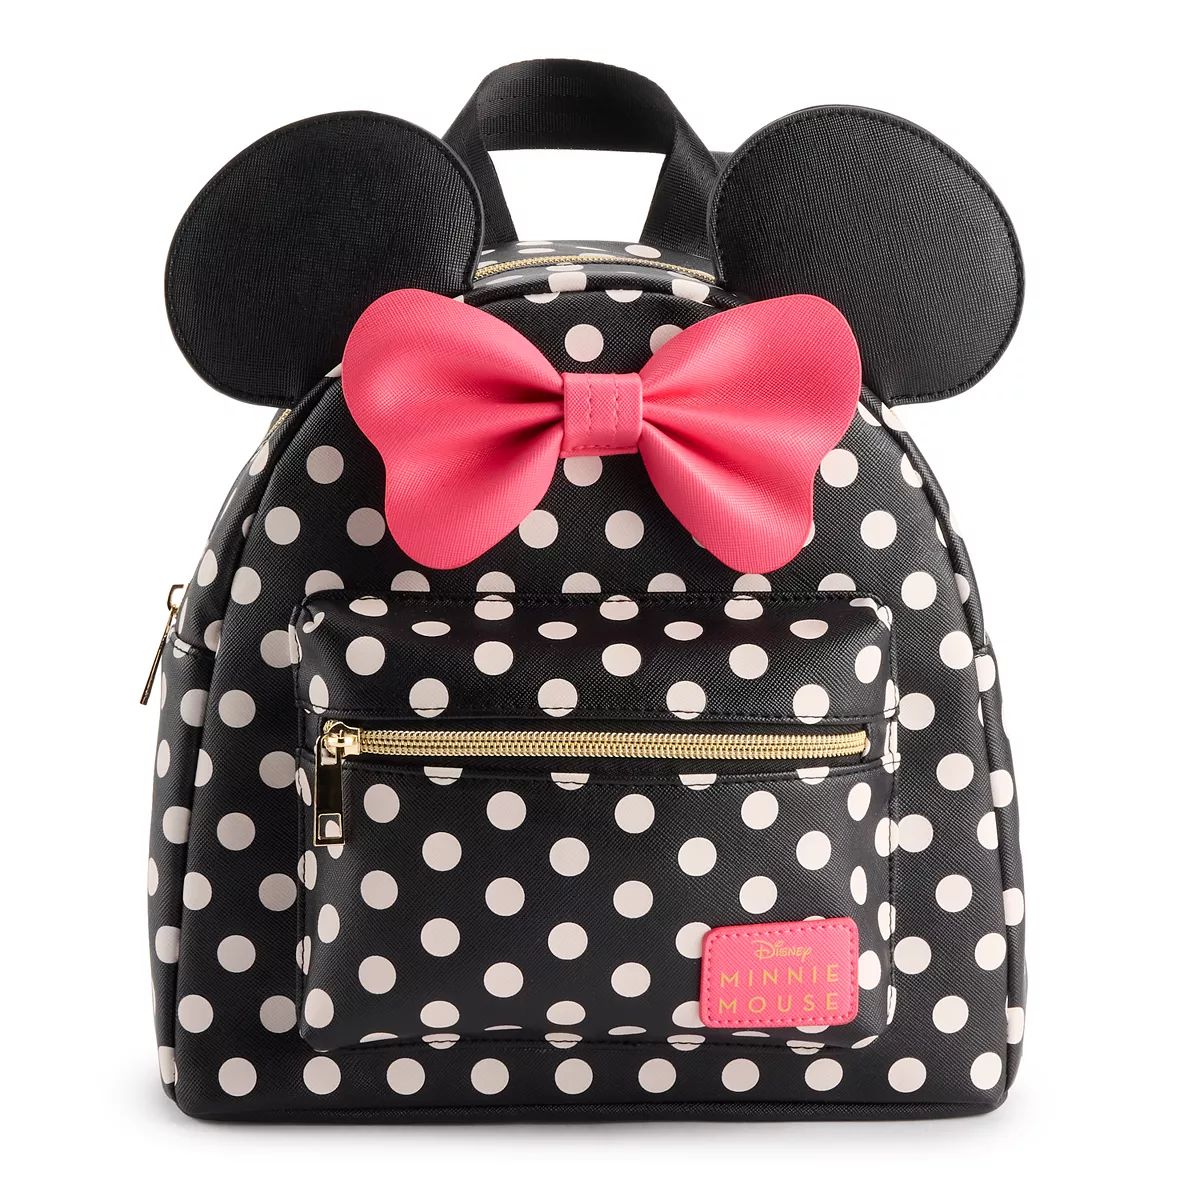 Disney's Minnie Mouse Polka Dot Print Mini Backpack with Pink Bow | Kohl's